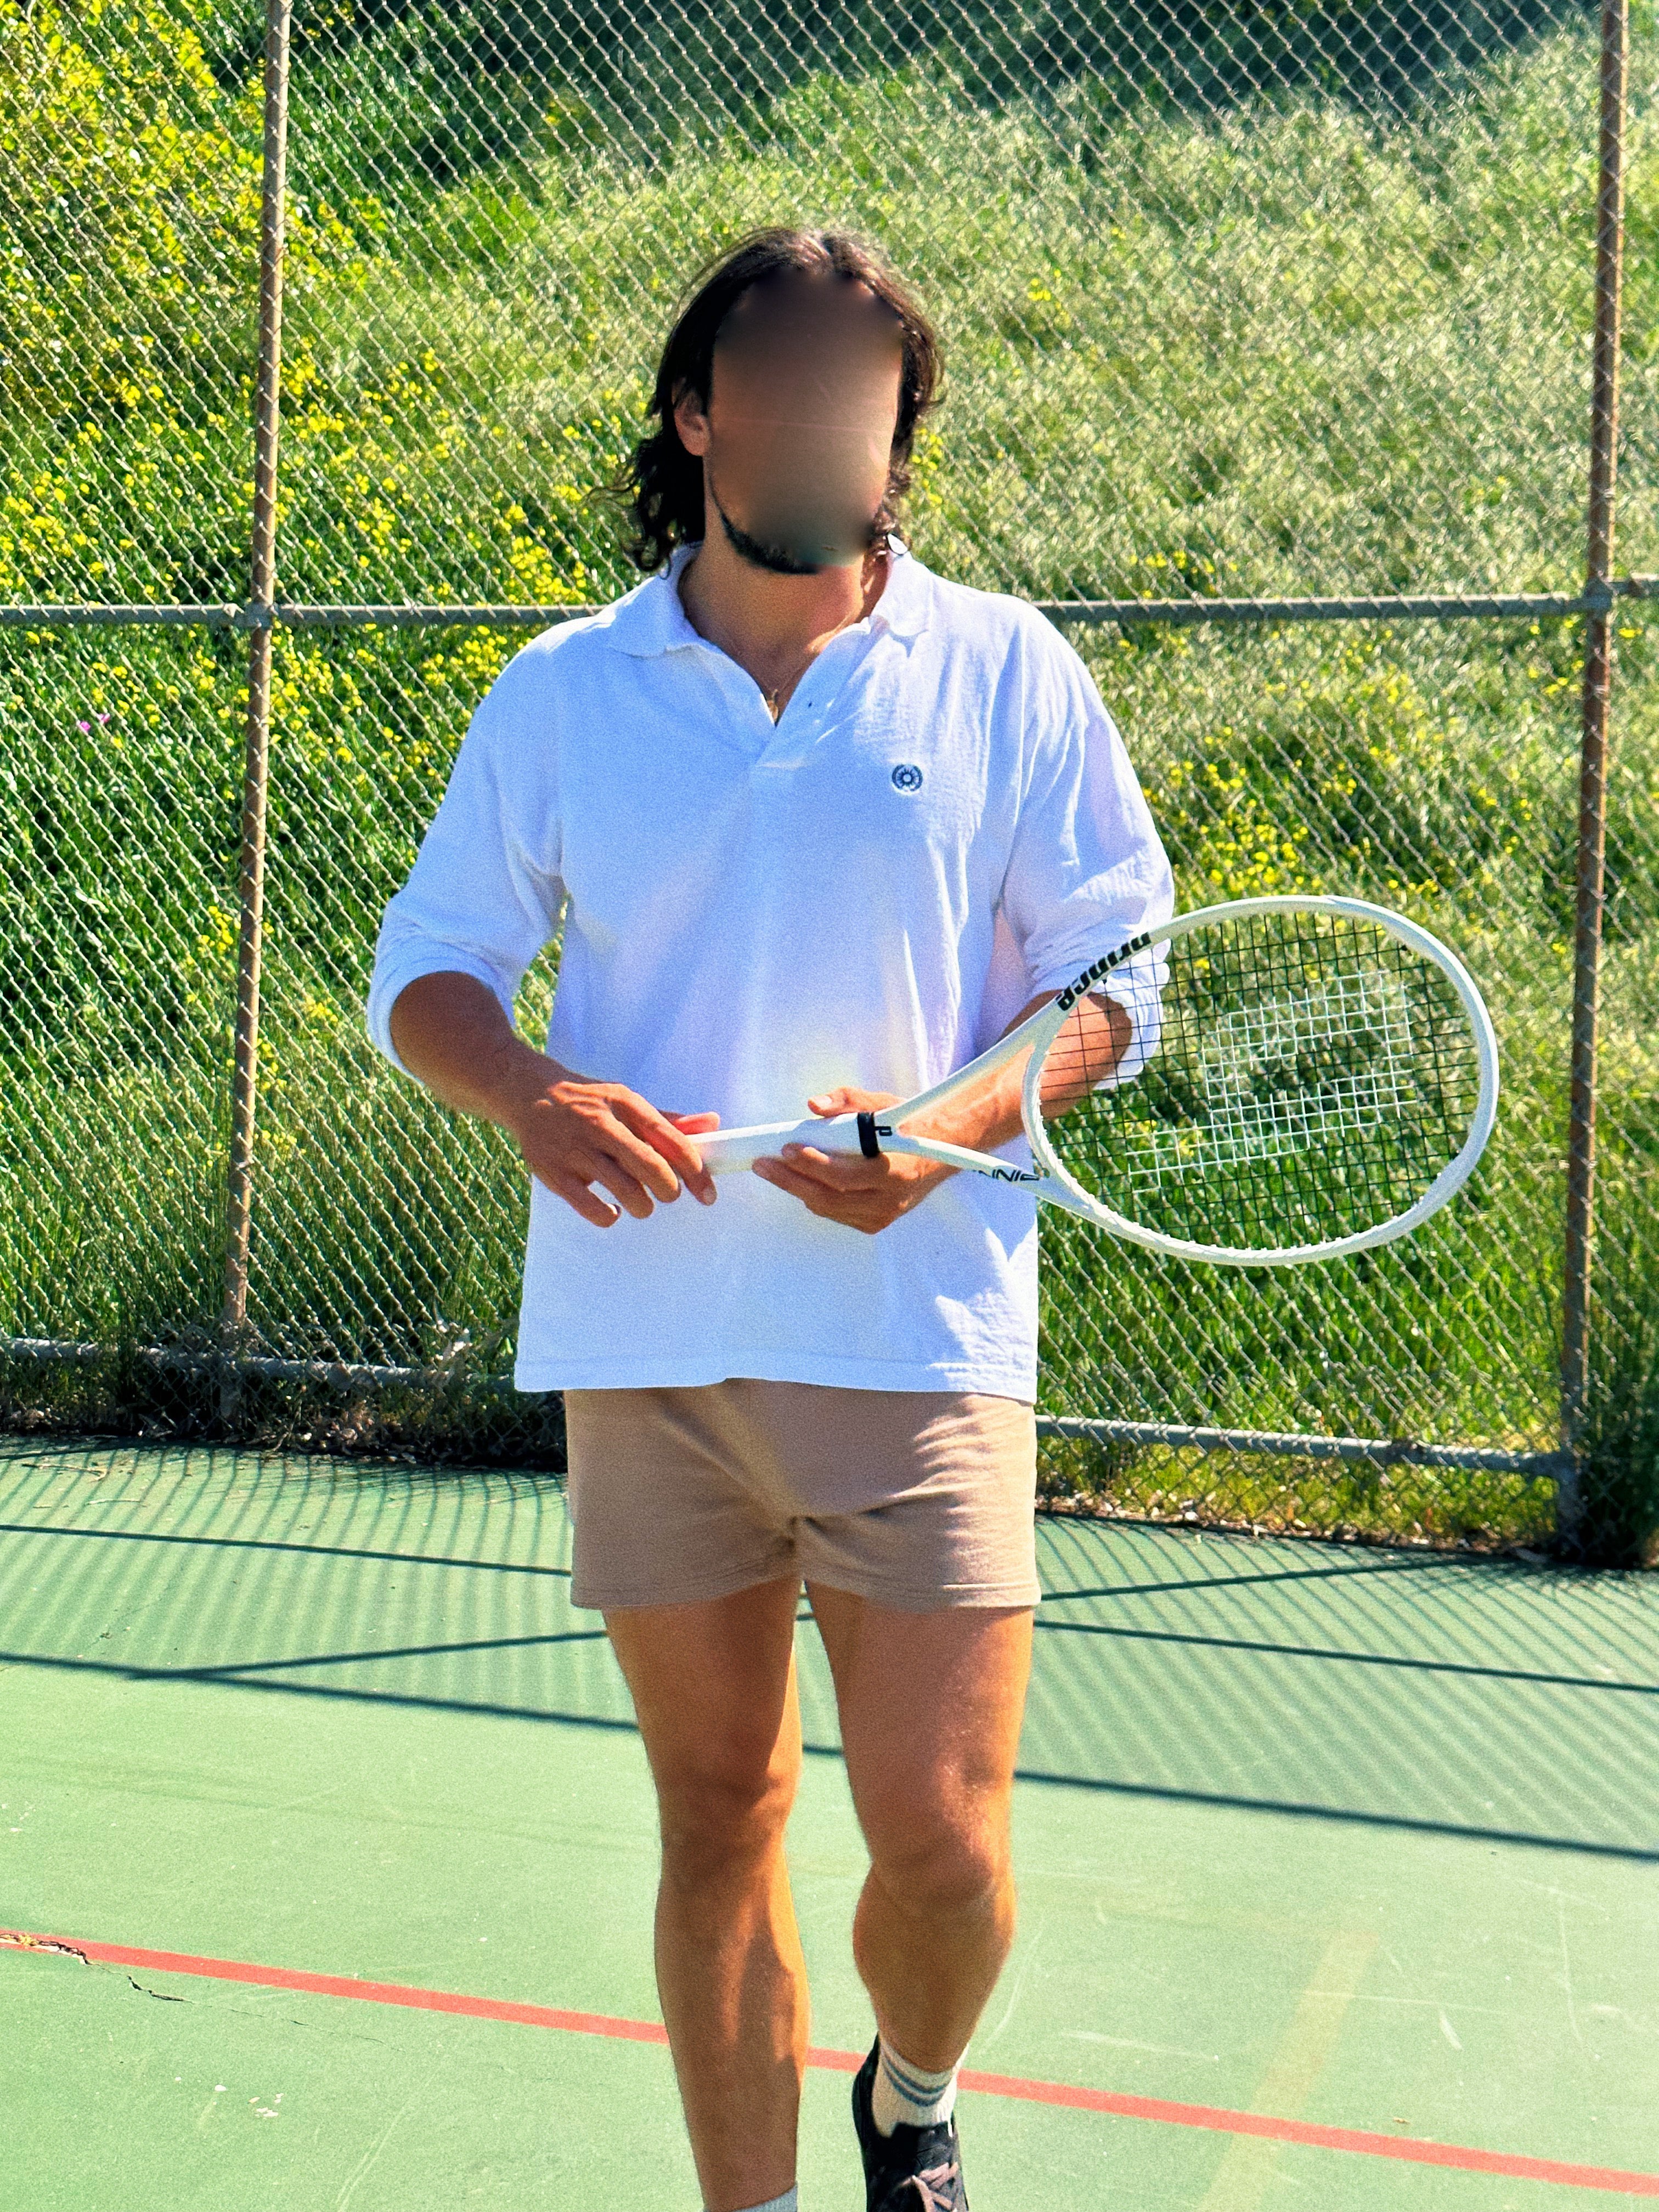 man holding tennis racket on a tennis court and wearing a white polo tshirt made of cotton 